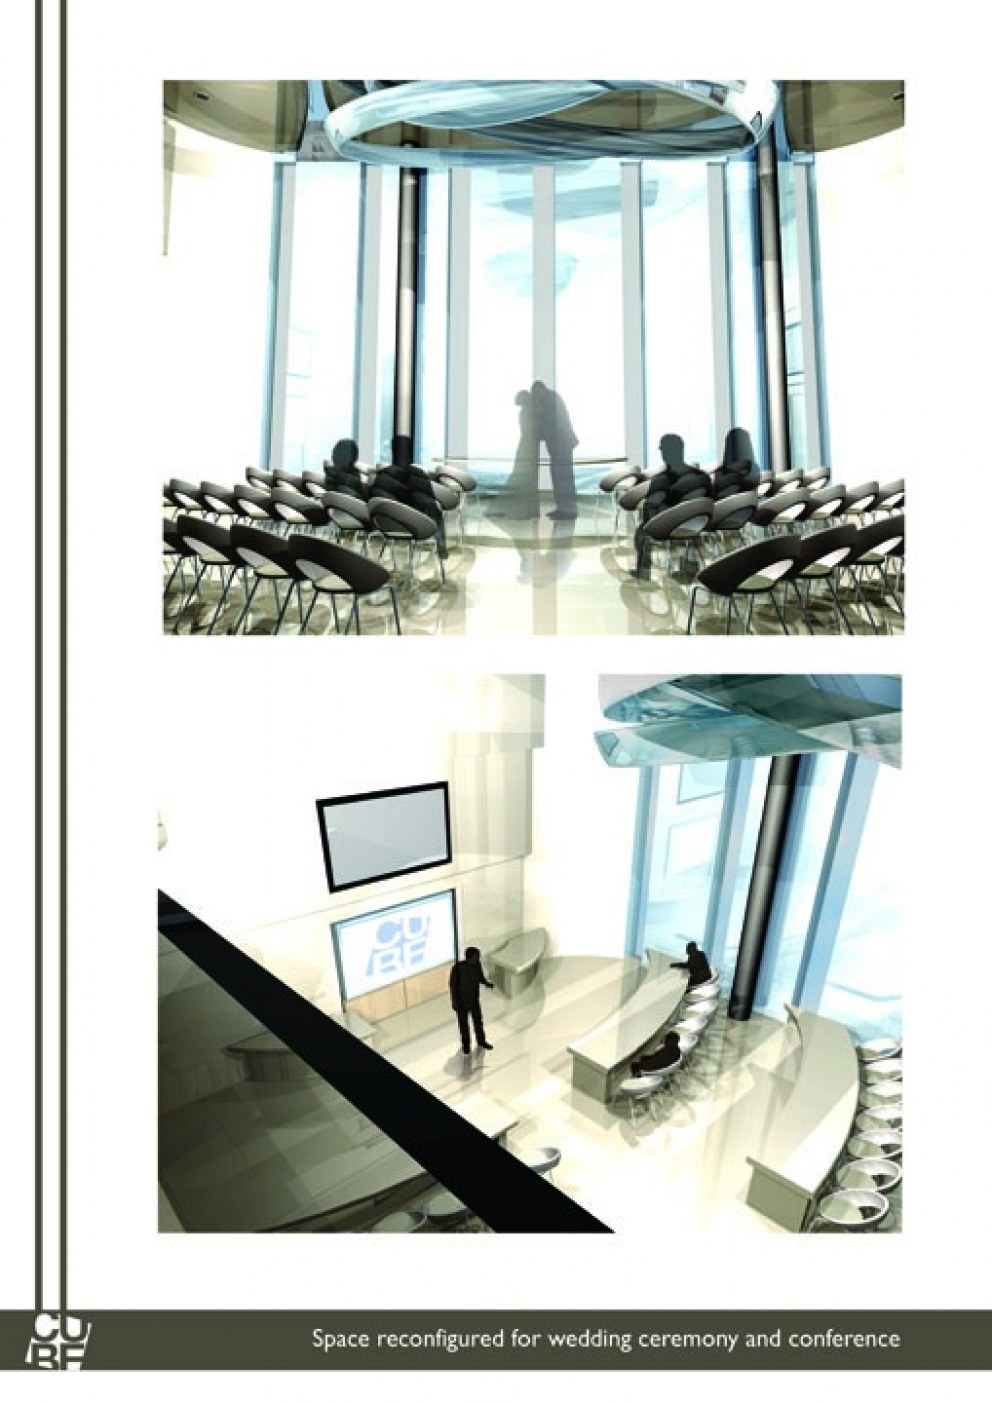 Council Chambers | Council Chambers, Corby Cube - in conference and wedding ceremony mode | Interior Designers